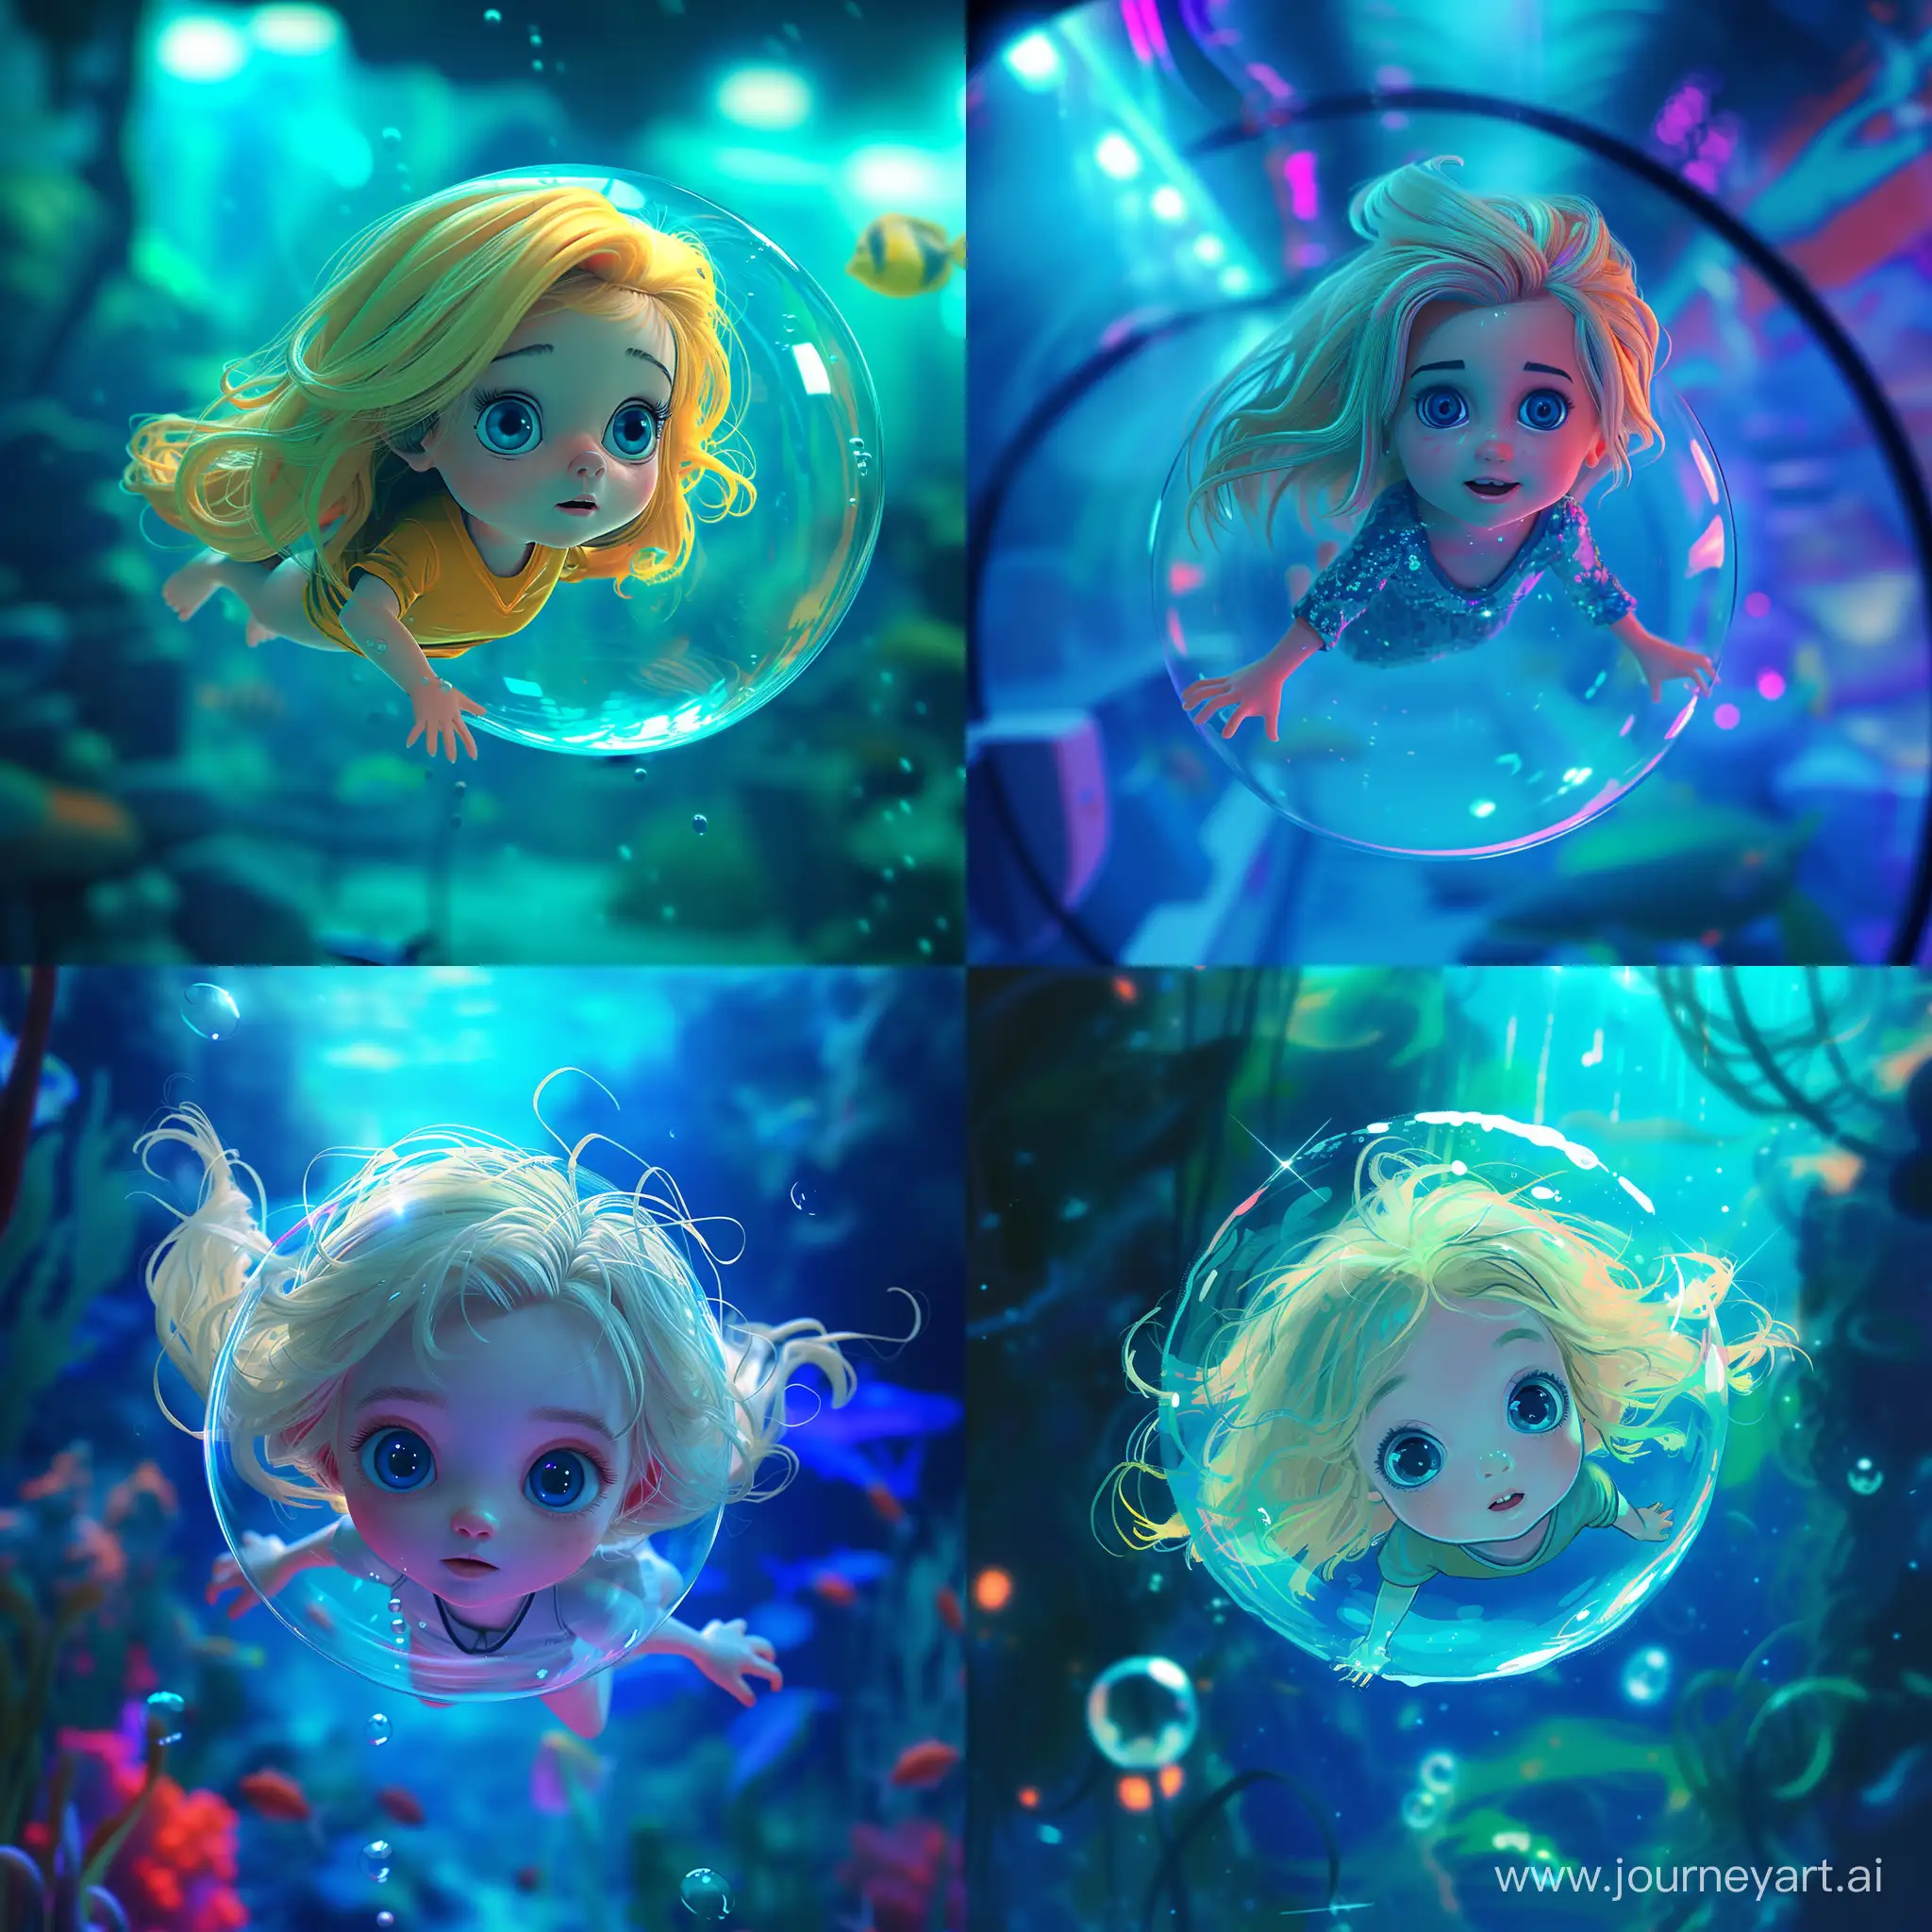 A little girl with blonde hair and blue eyes swims in an air bubble in the aquarium water, in cartoon style, neon colors, high quality